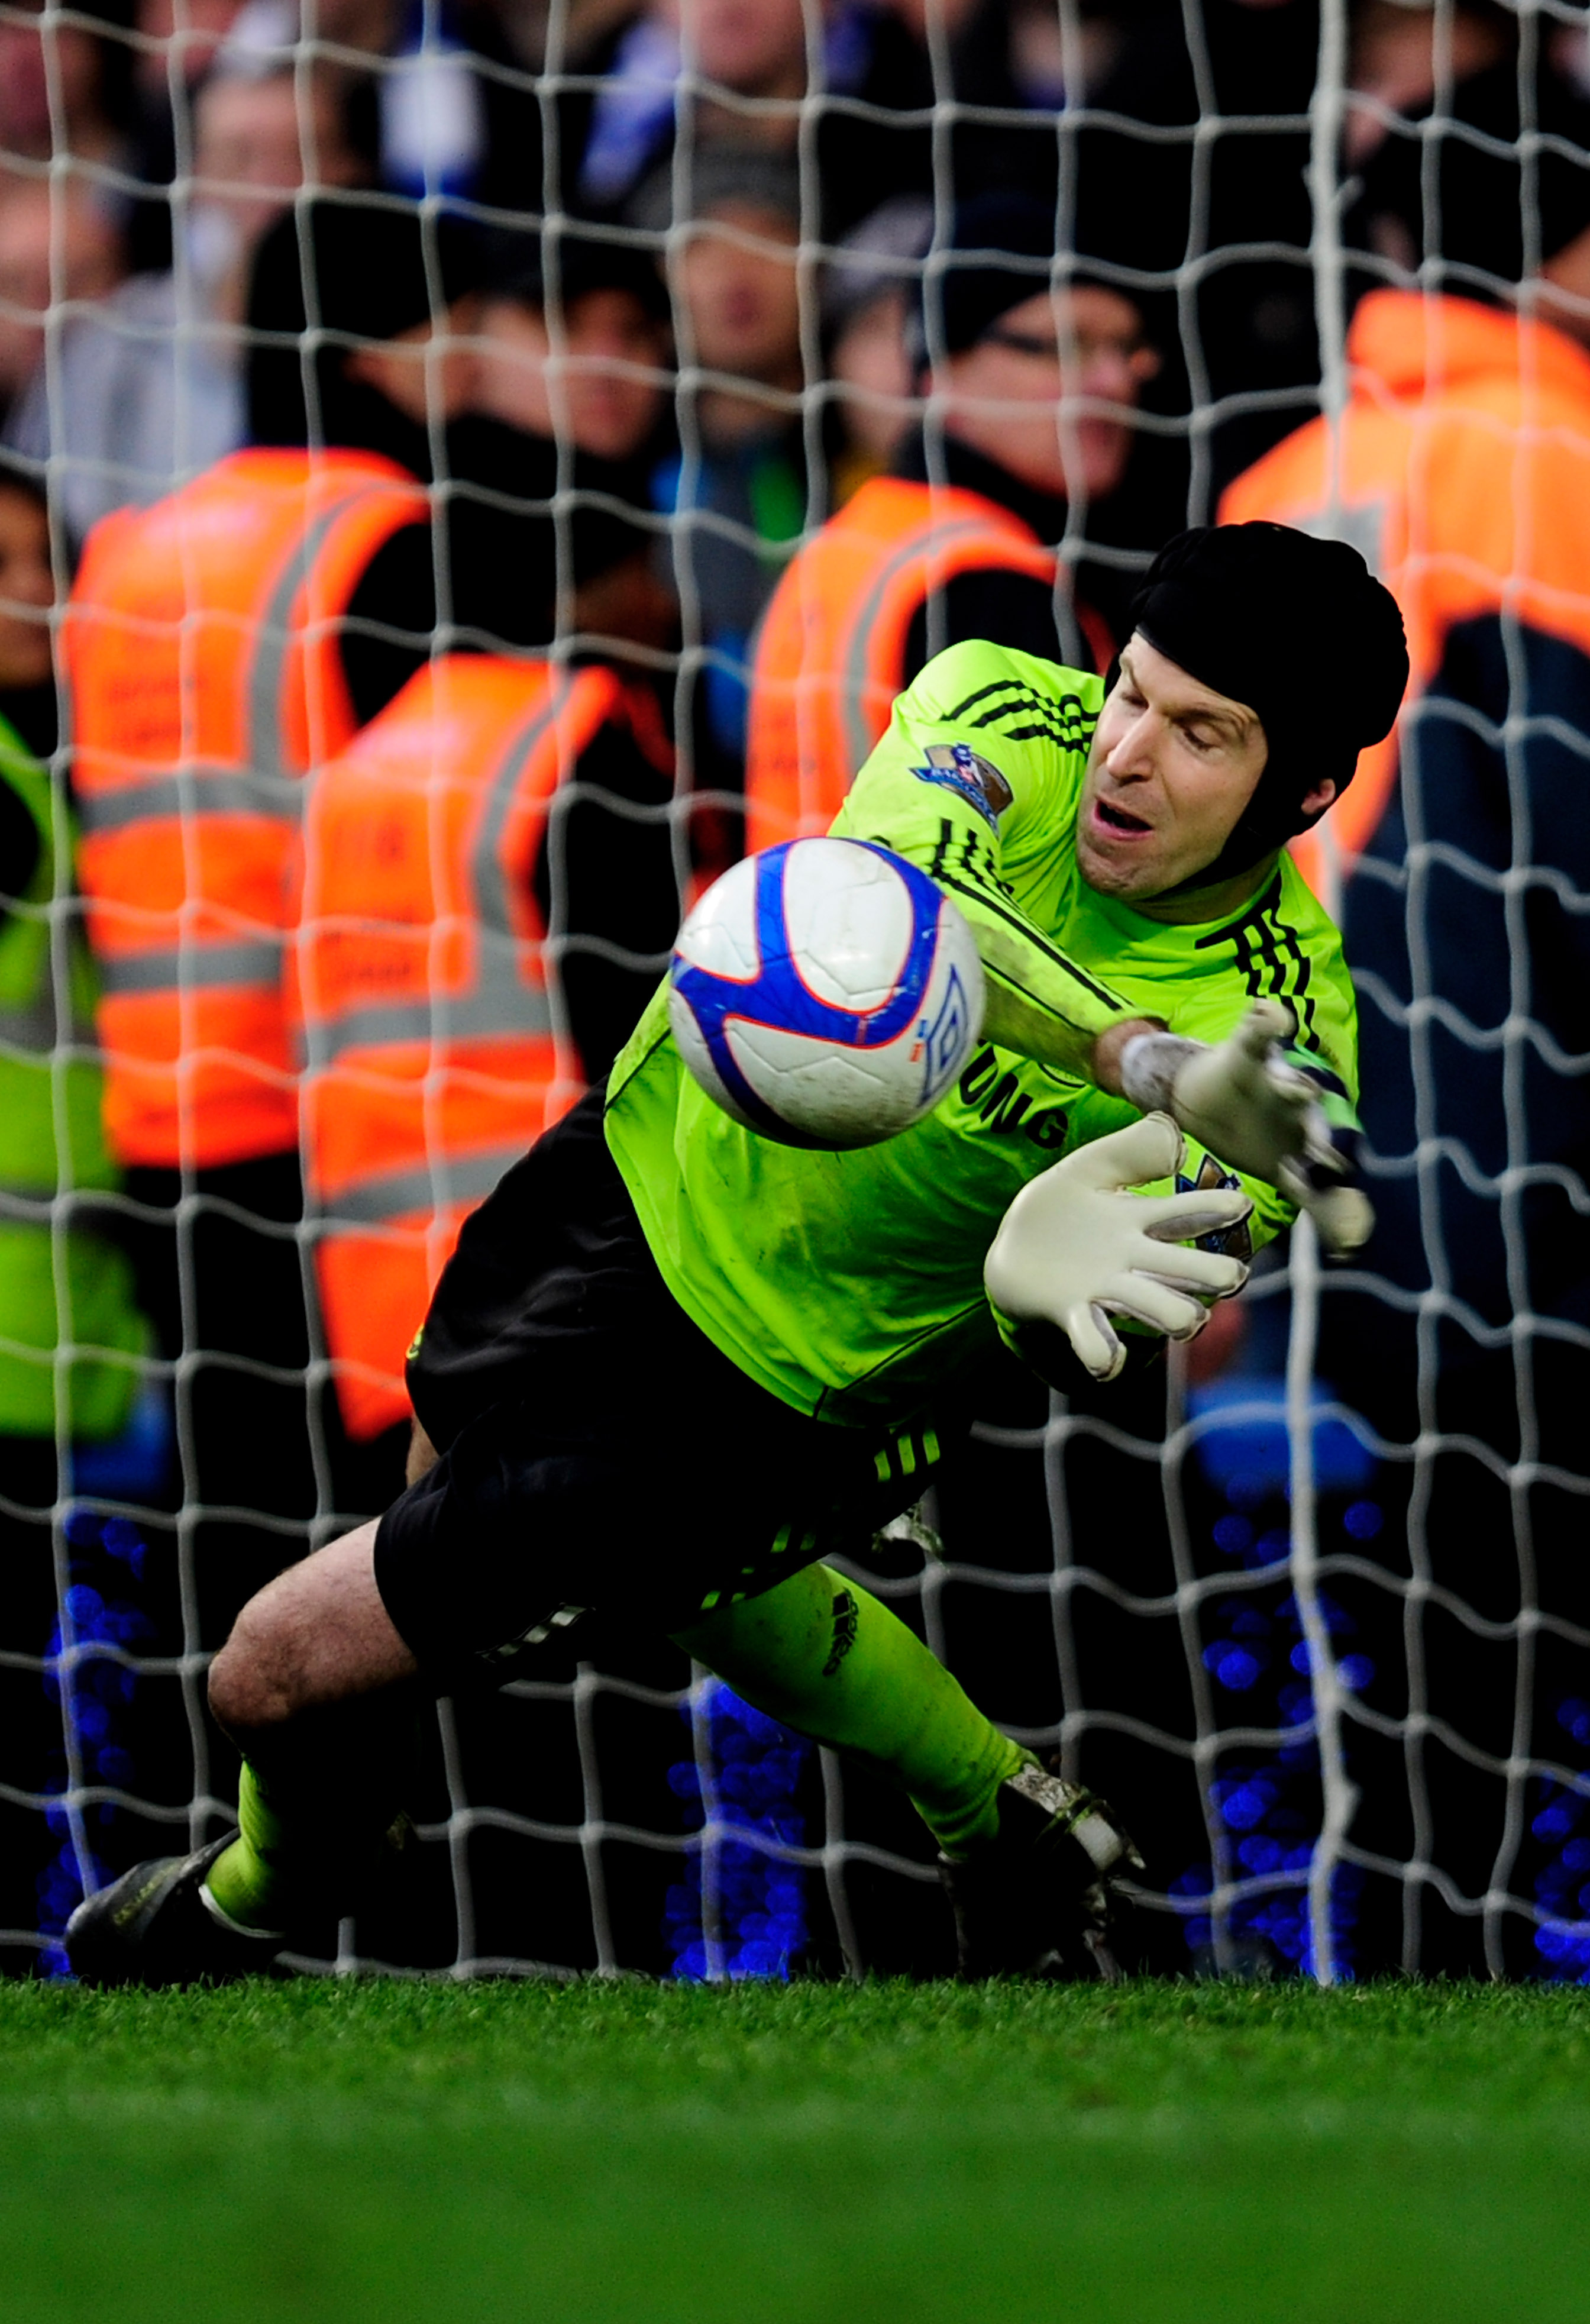 LONDON, ENGLAND - FEBRUARY 19:  Petr Cech of Chelsea saves the penalty of Leighton Baines of Everton in the penalty shootout during the FA Cup sponsored by E.ON 4th round replay match between Chelsea and Everton at Stamford Bridge on February 19, 2011 in